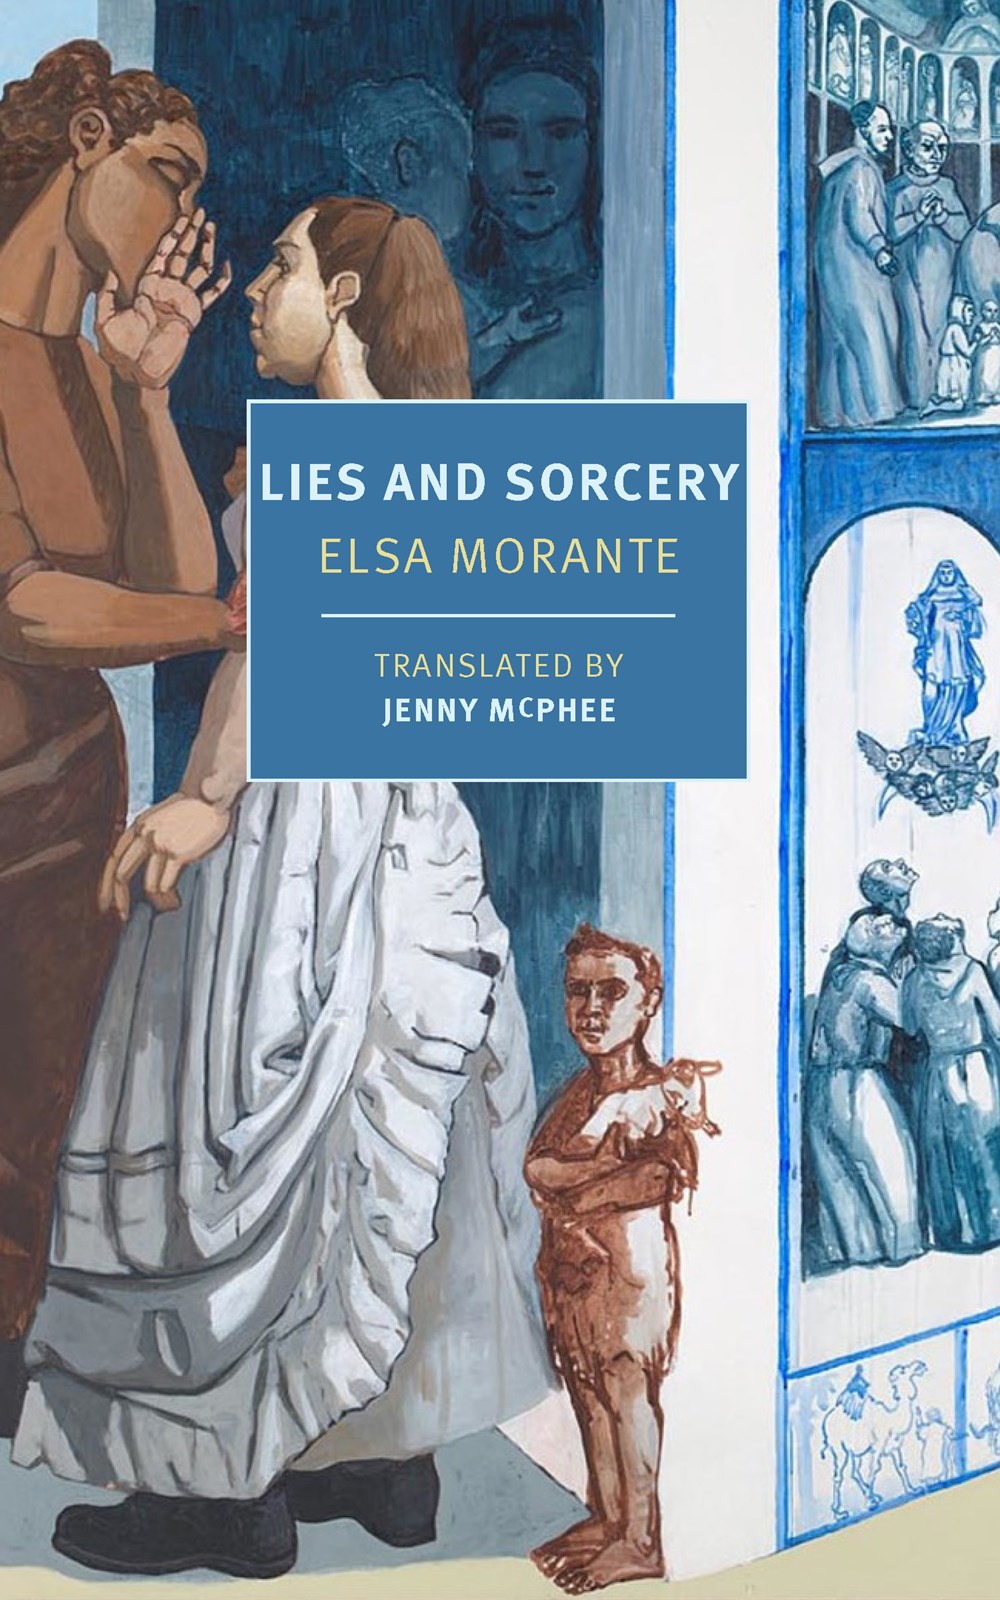 Lies and Sorcery by Elsa Morante